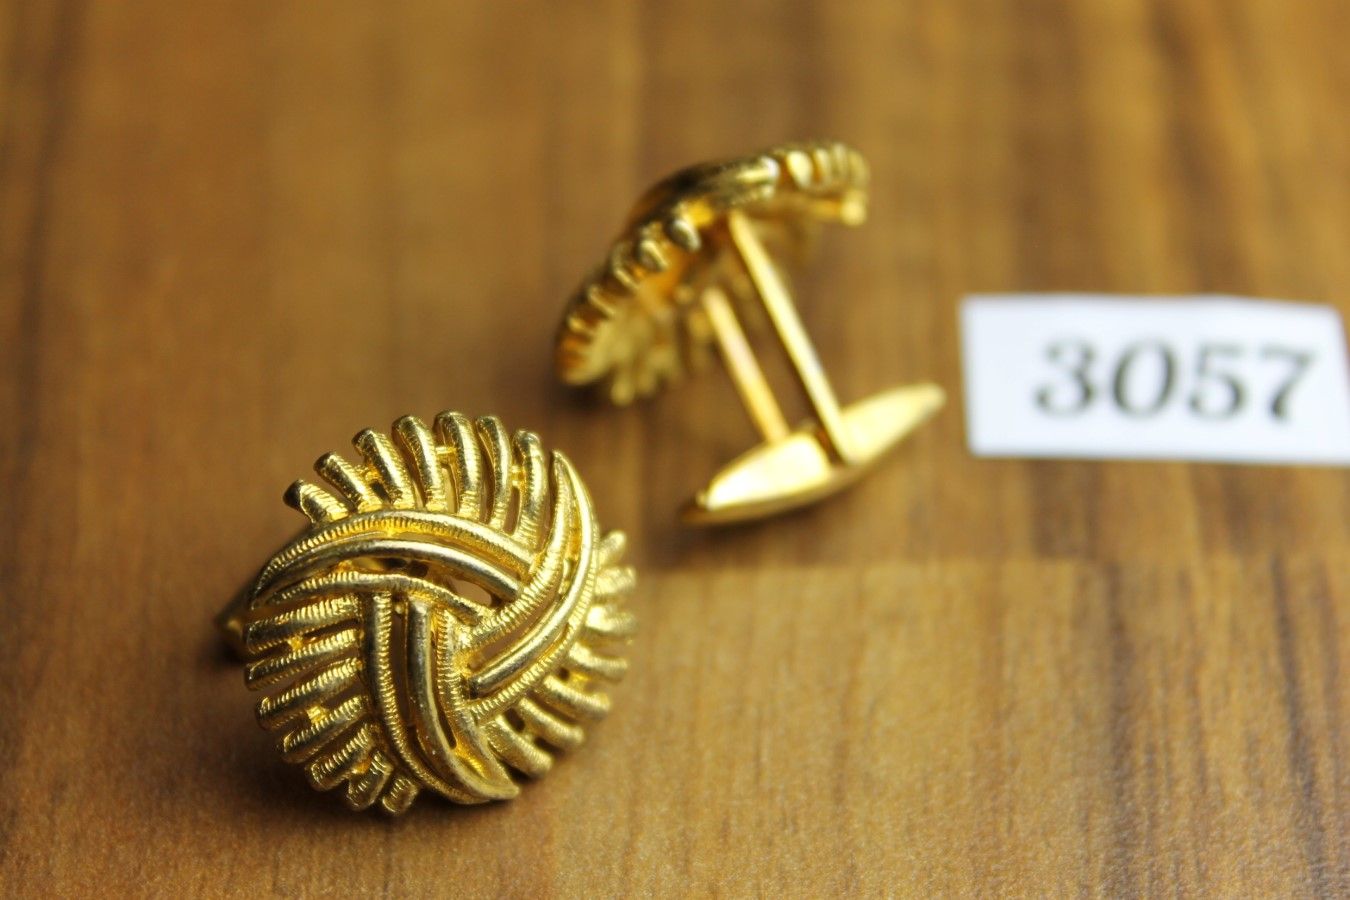 Vintage Gold Tone Metal Large Knot Cuff Links